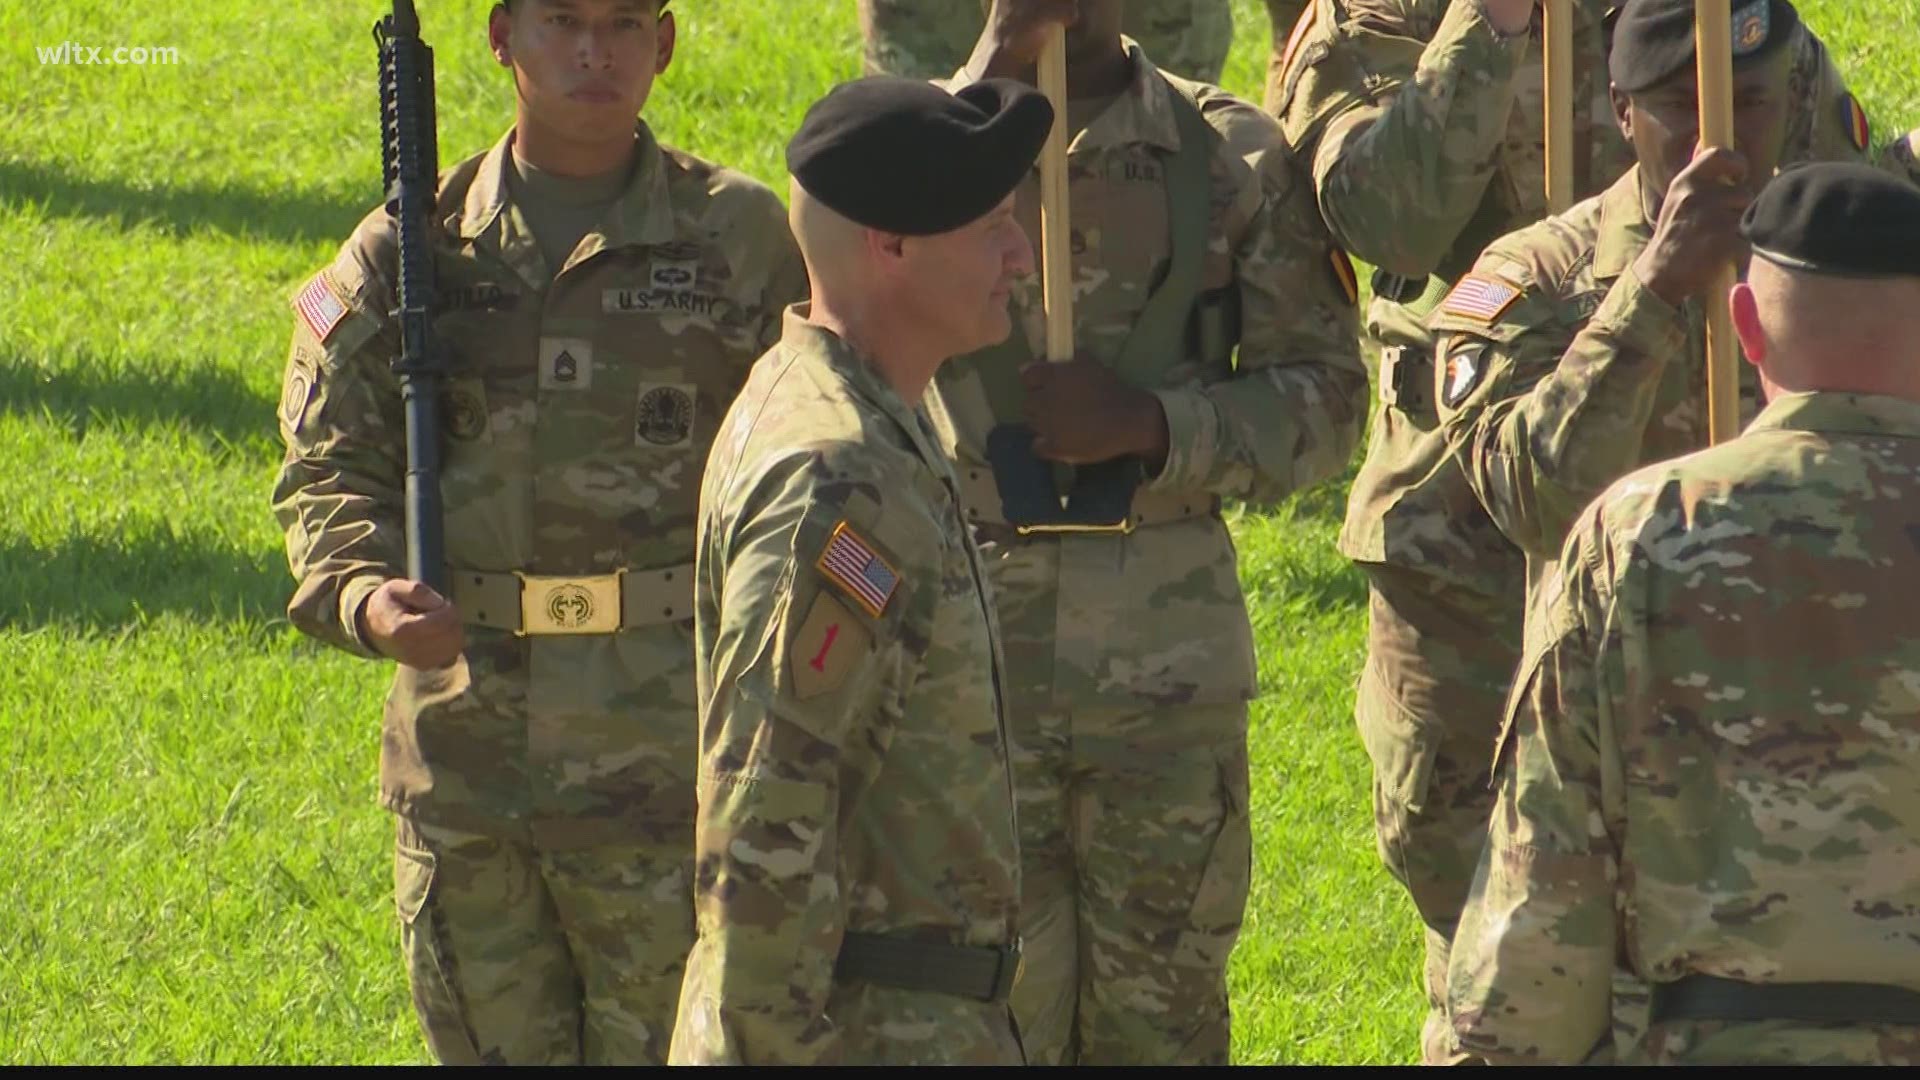 The Army base held a change of command ceremony to welcome Brig. General Patrick Michaelis.